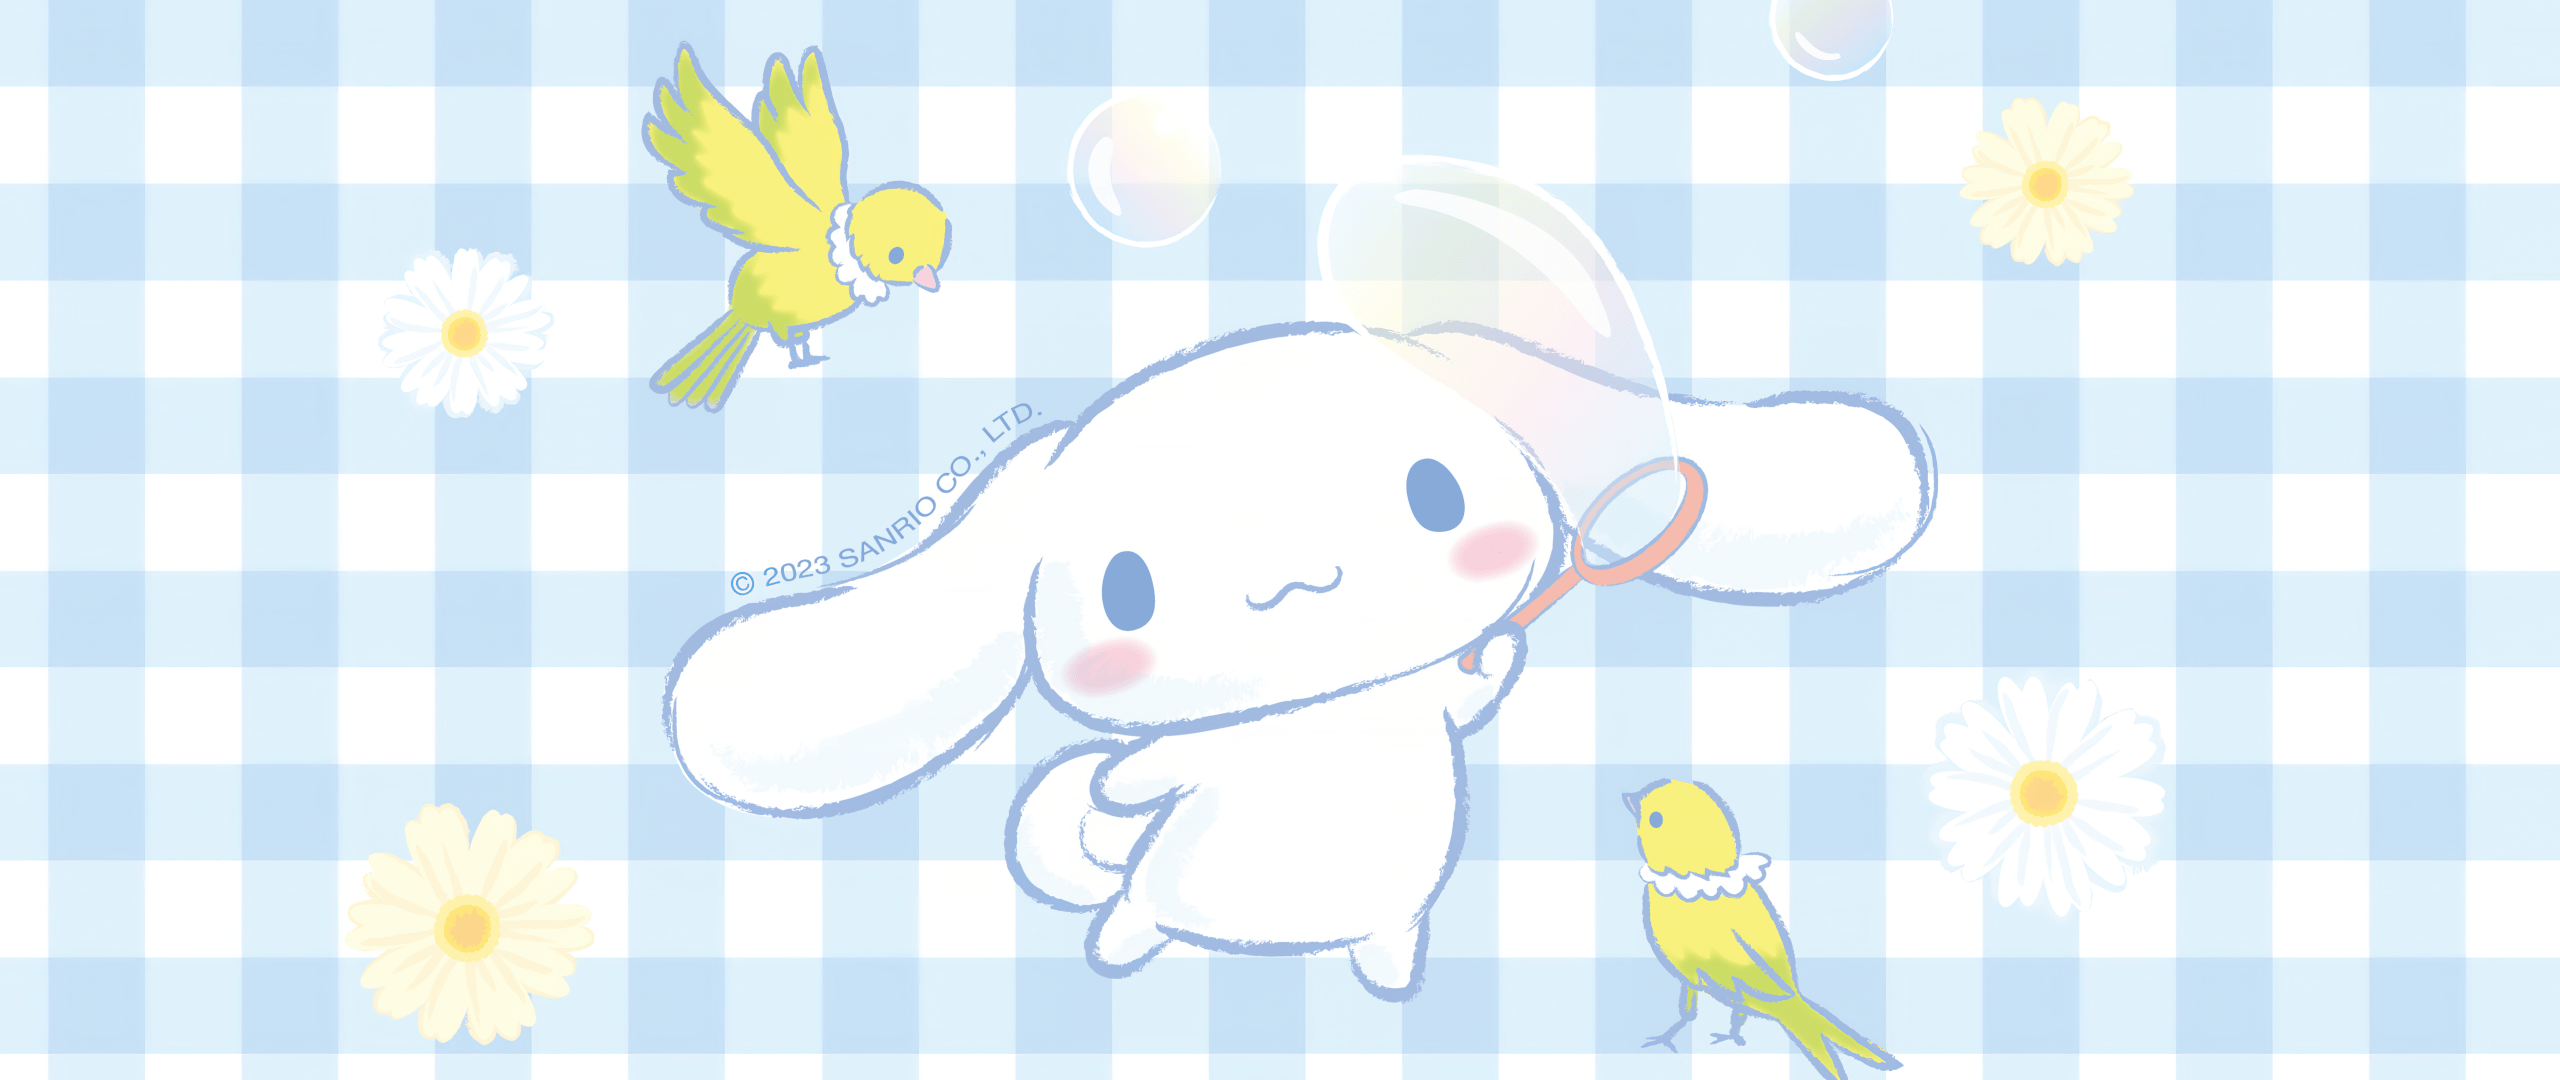 Cinnamoroll is playing with bubbles on a blue checkered background - Cinnamoroll